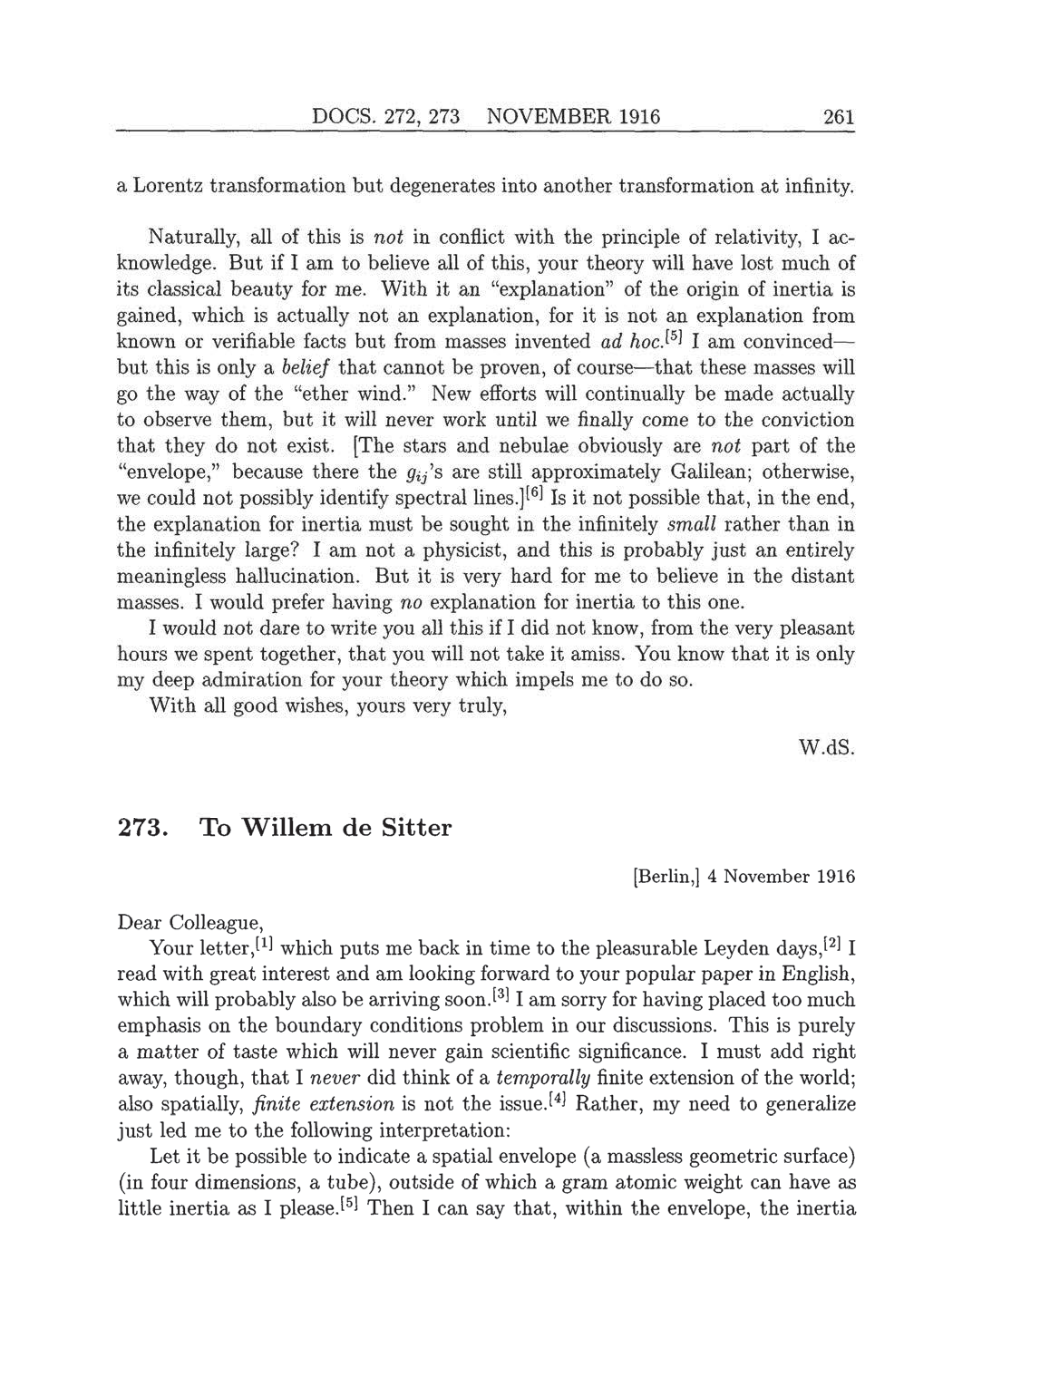 Volume 8: The Berlin Years: Correspondence, 1914-1918 (English translation supplement) page 261